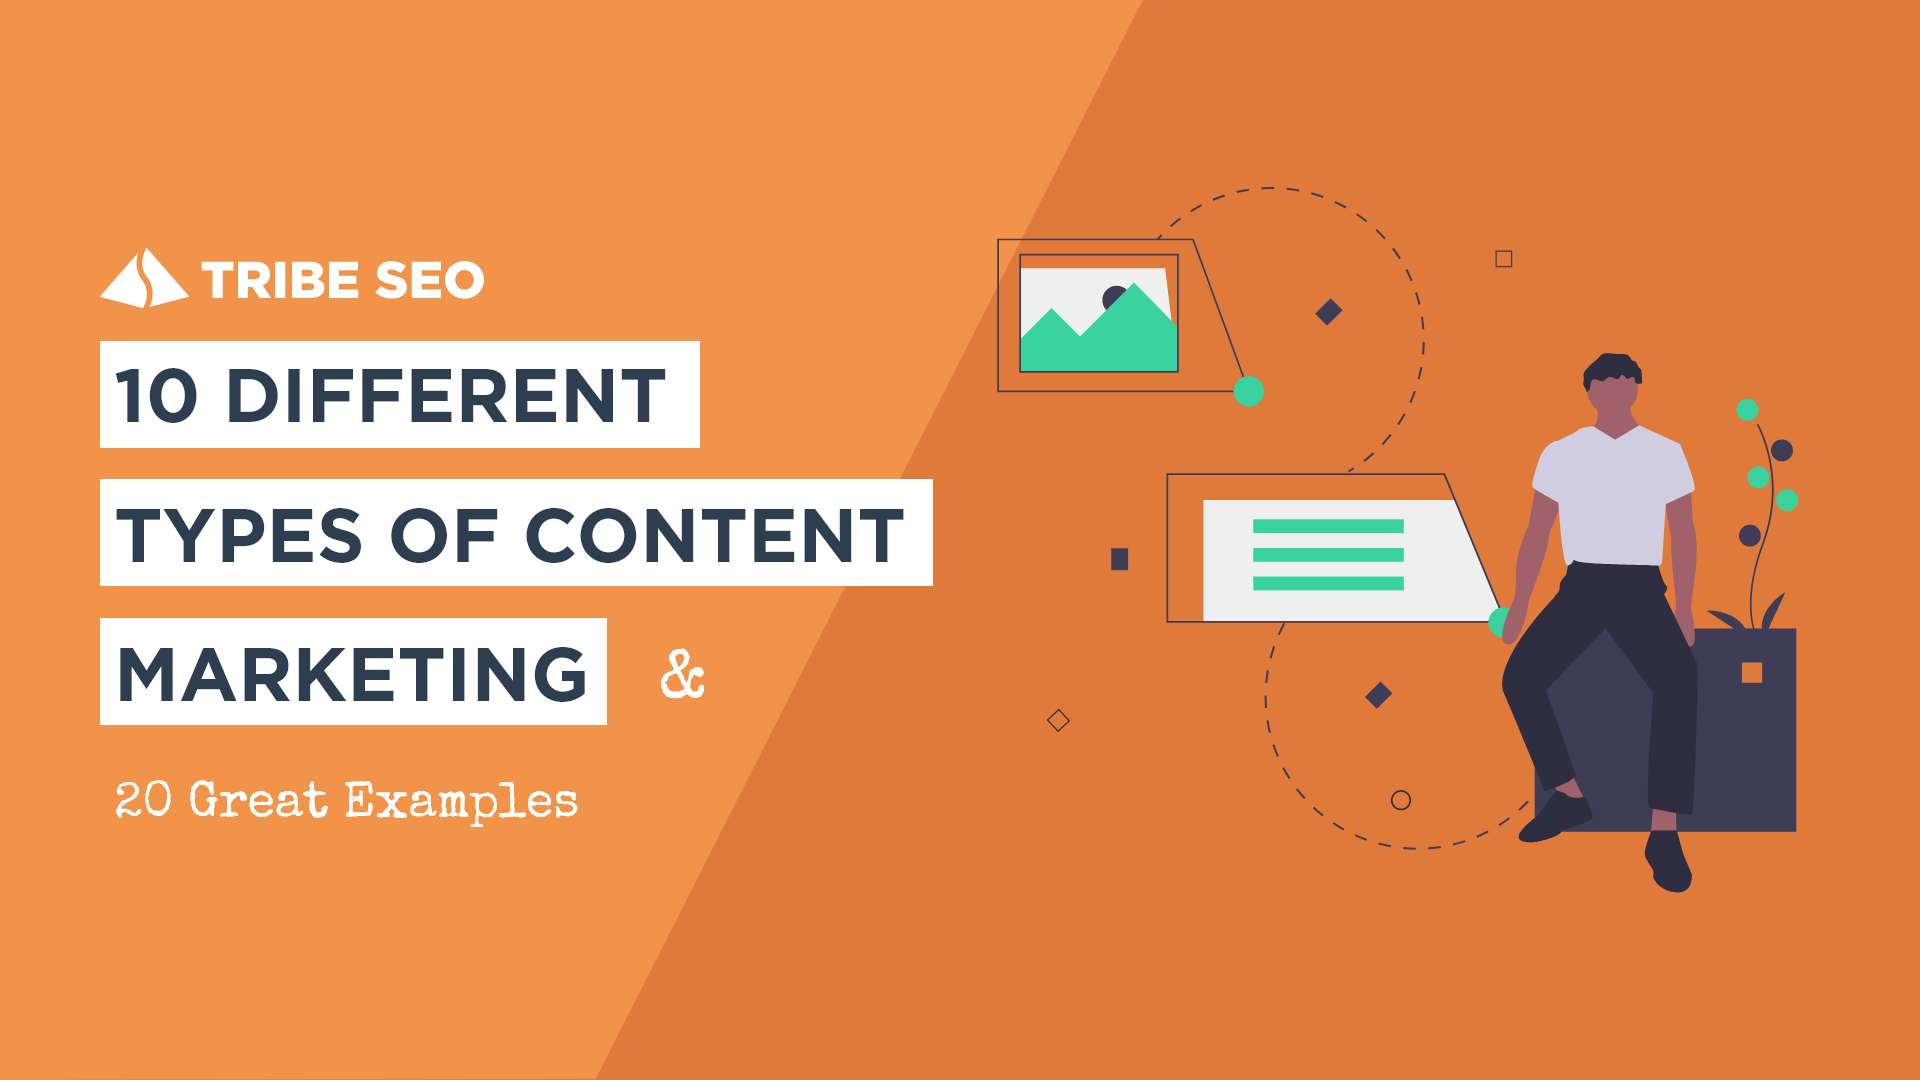 Ten Different Types of Content Marketing